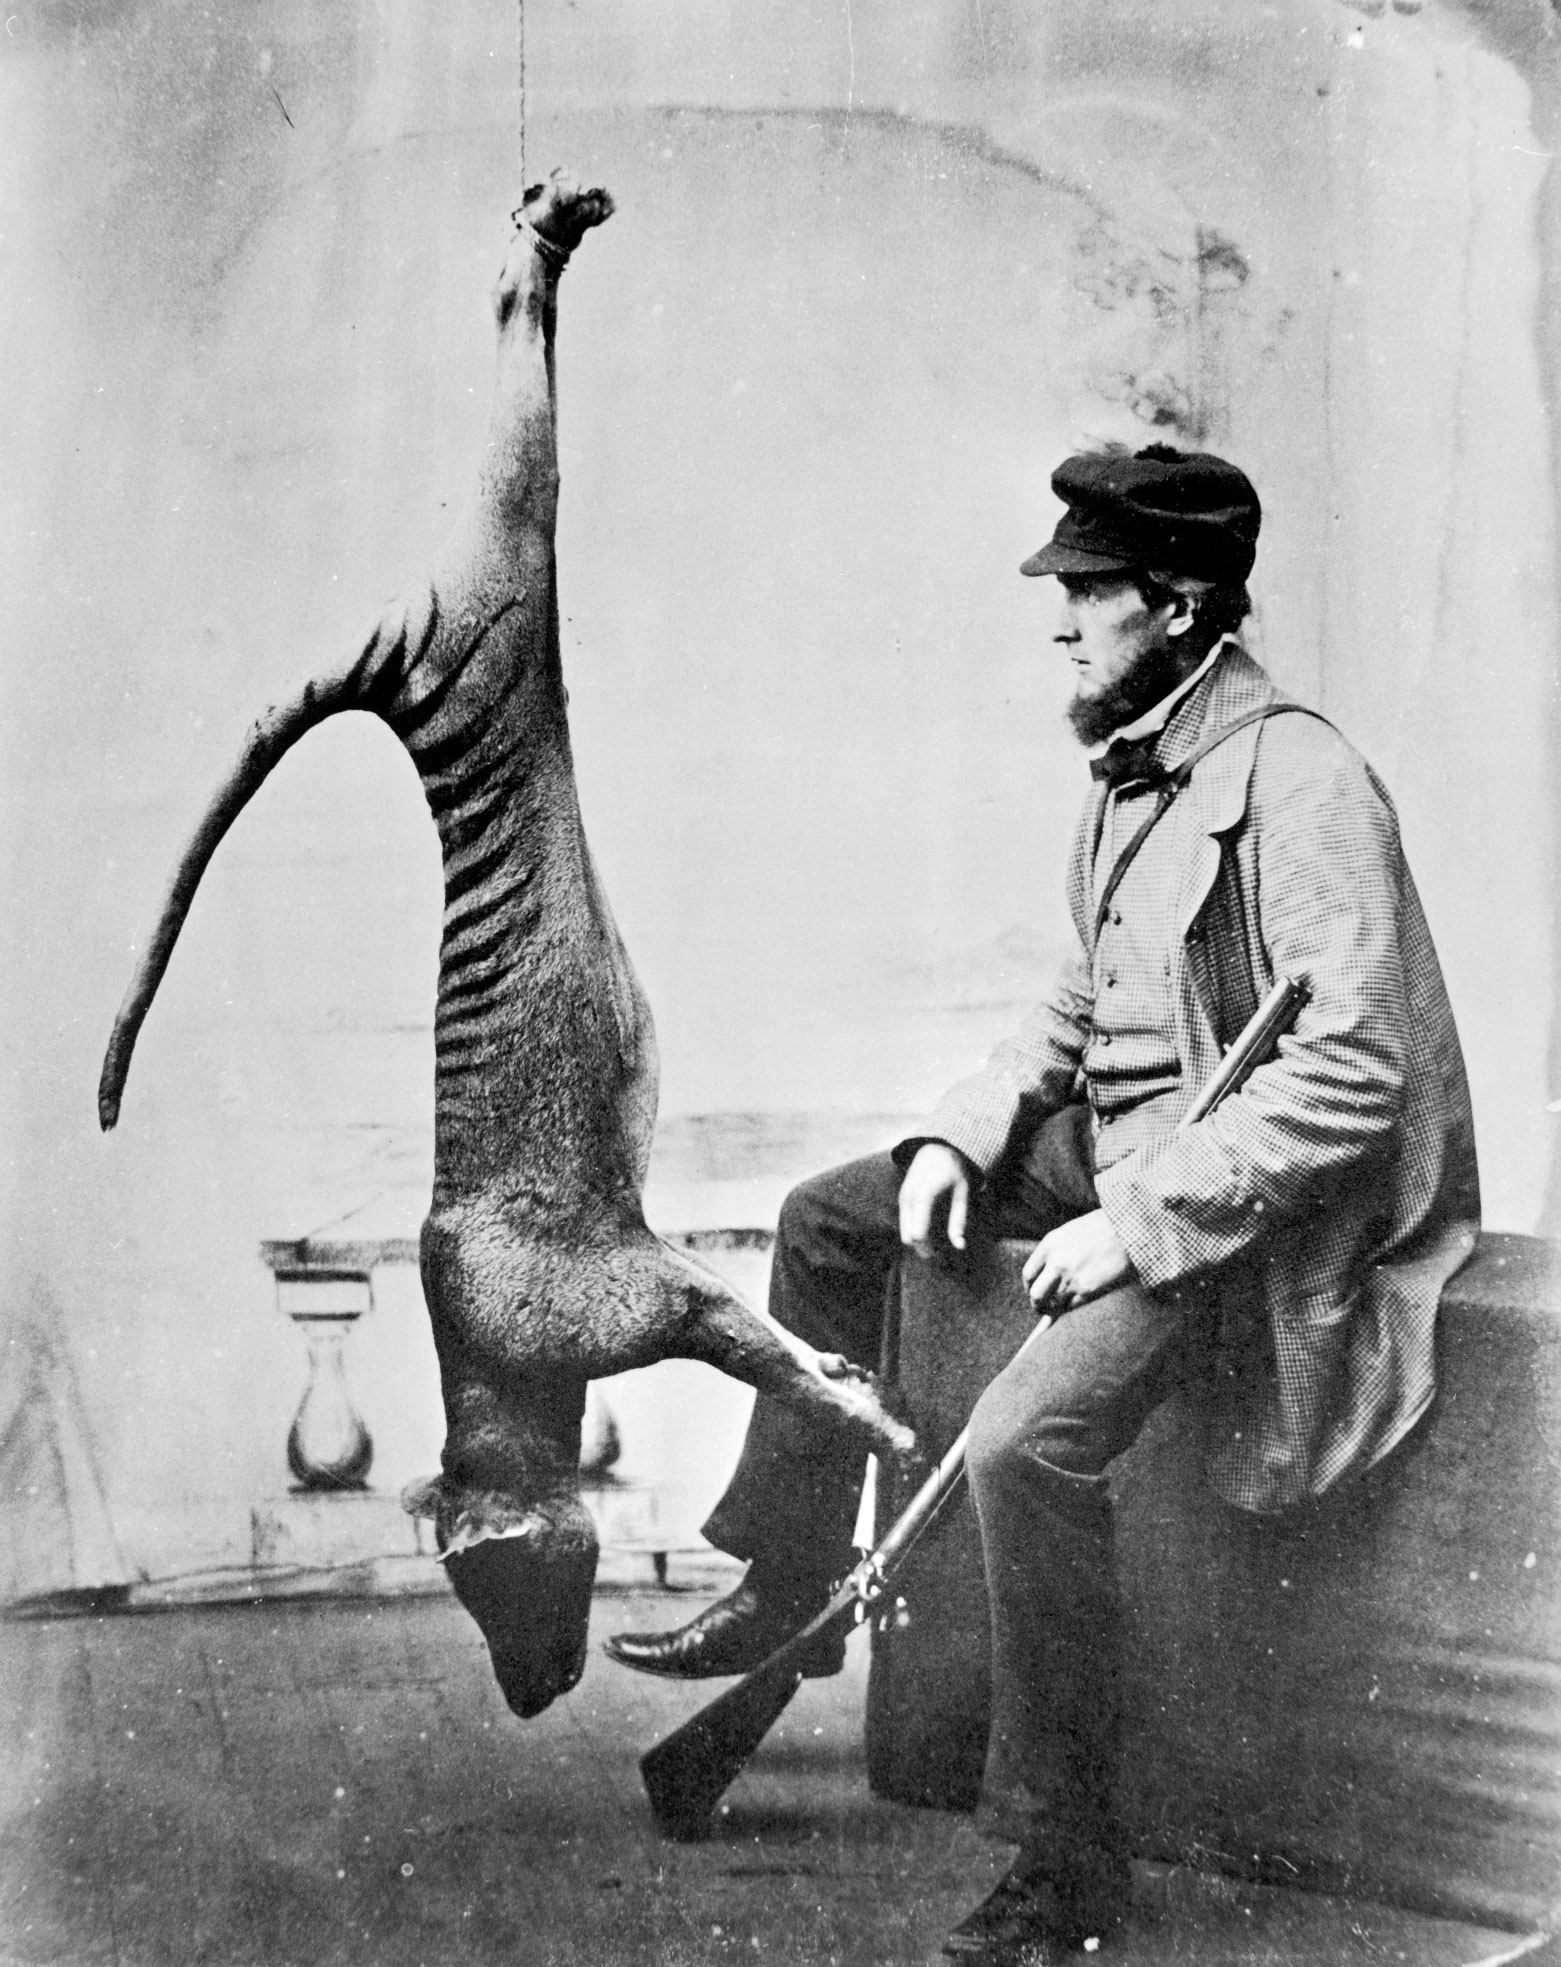 Hunter poses with dead thylacine, 1869.